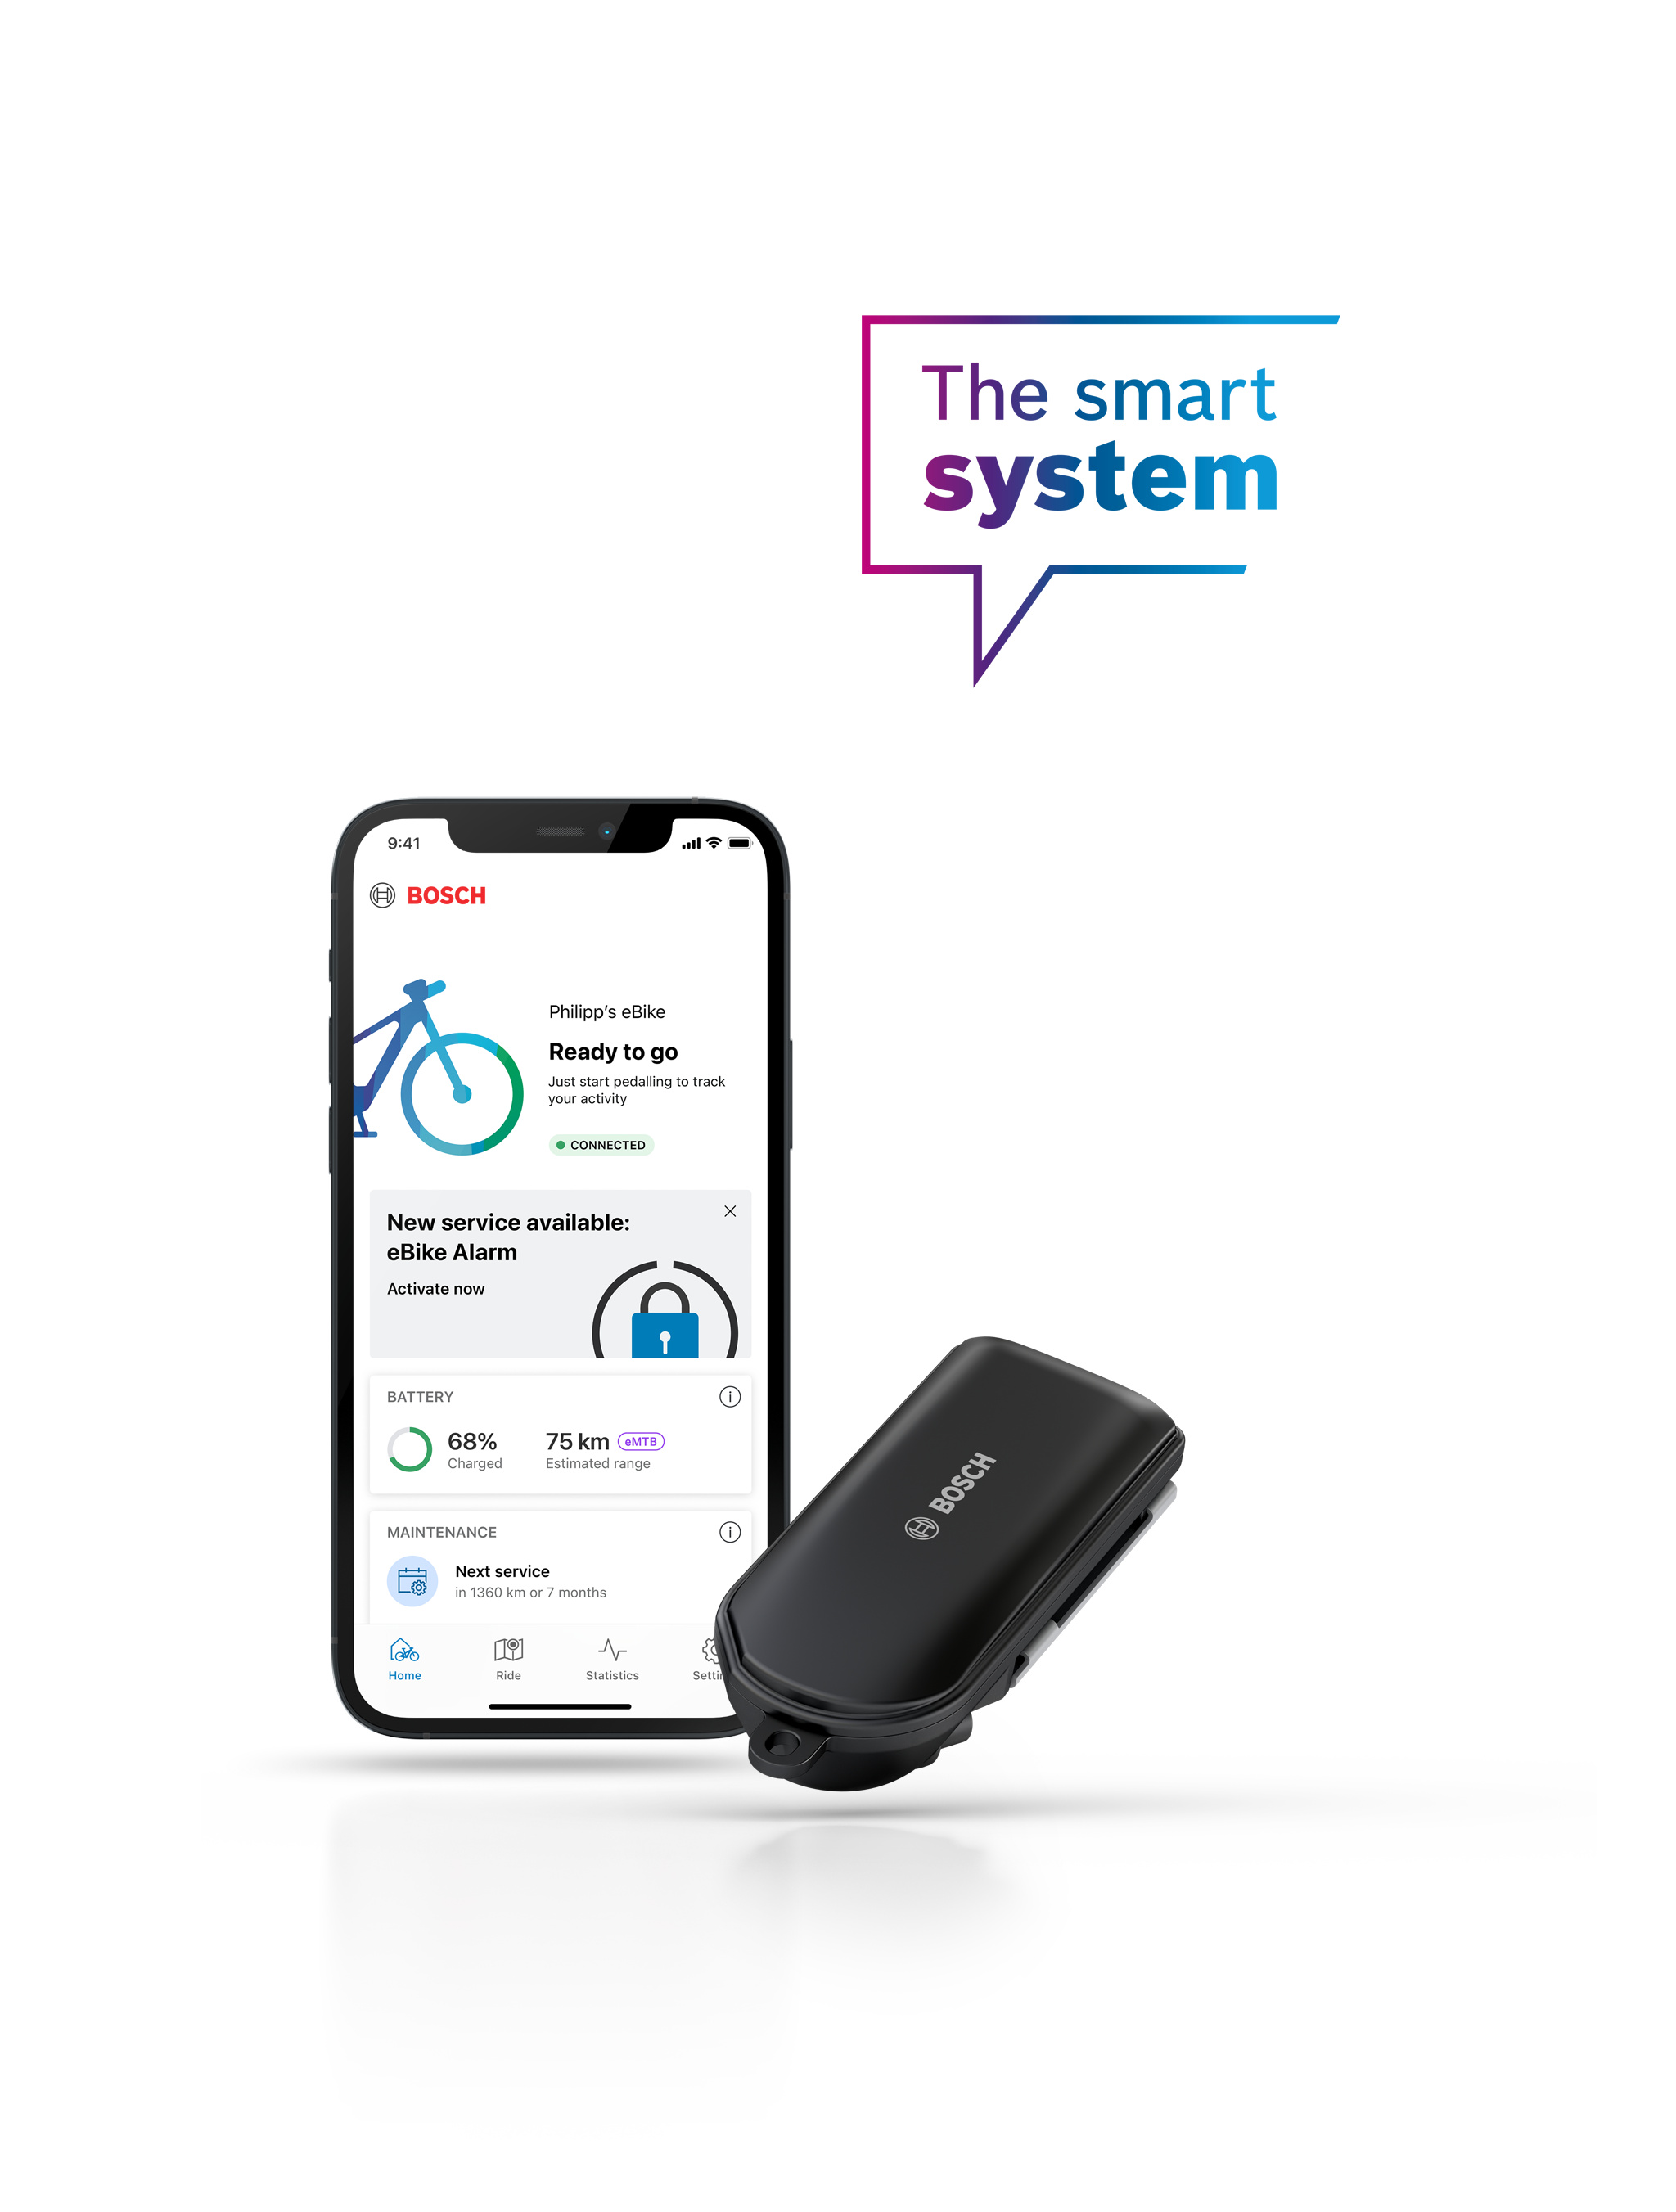 The additional theft protection eBike Alarm allows you to park your eBike more securely